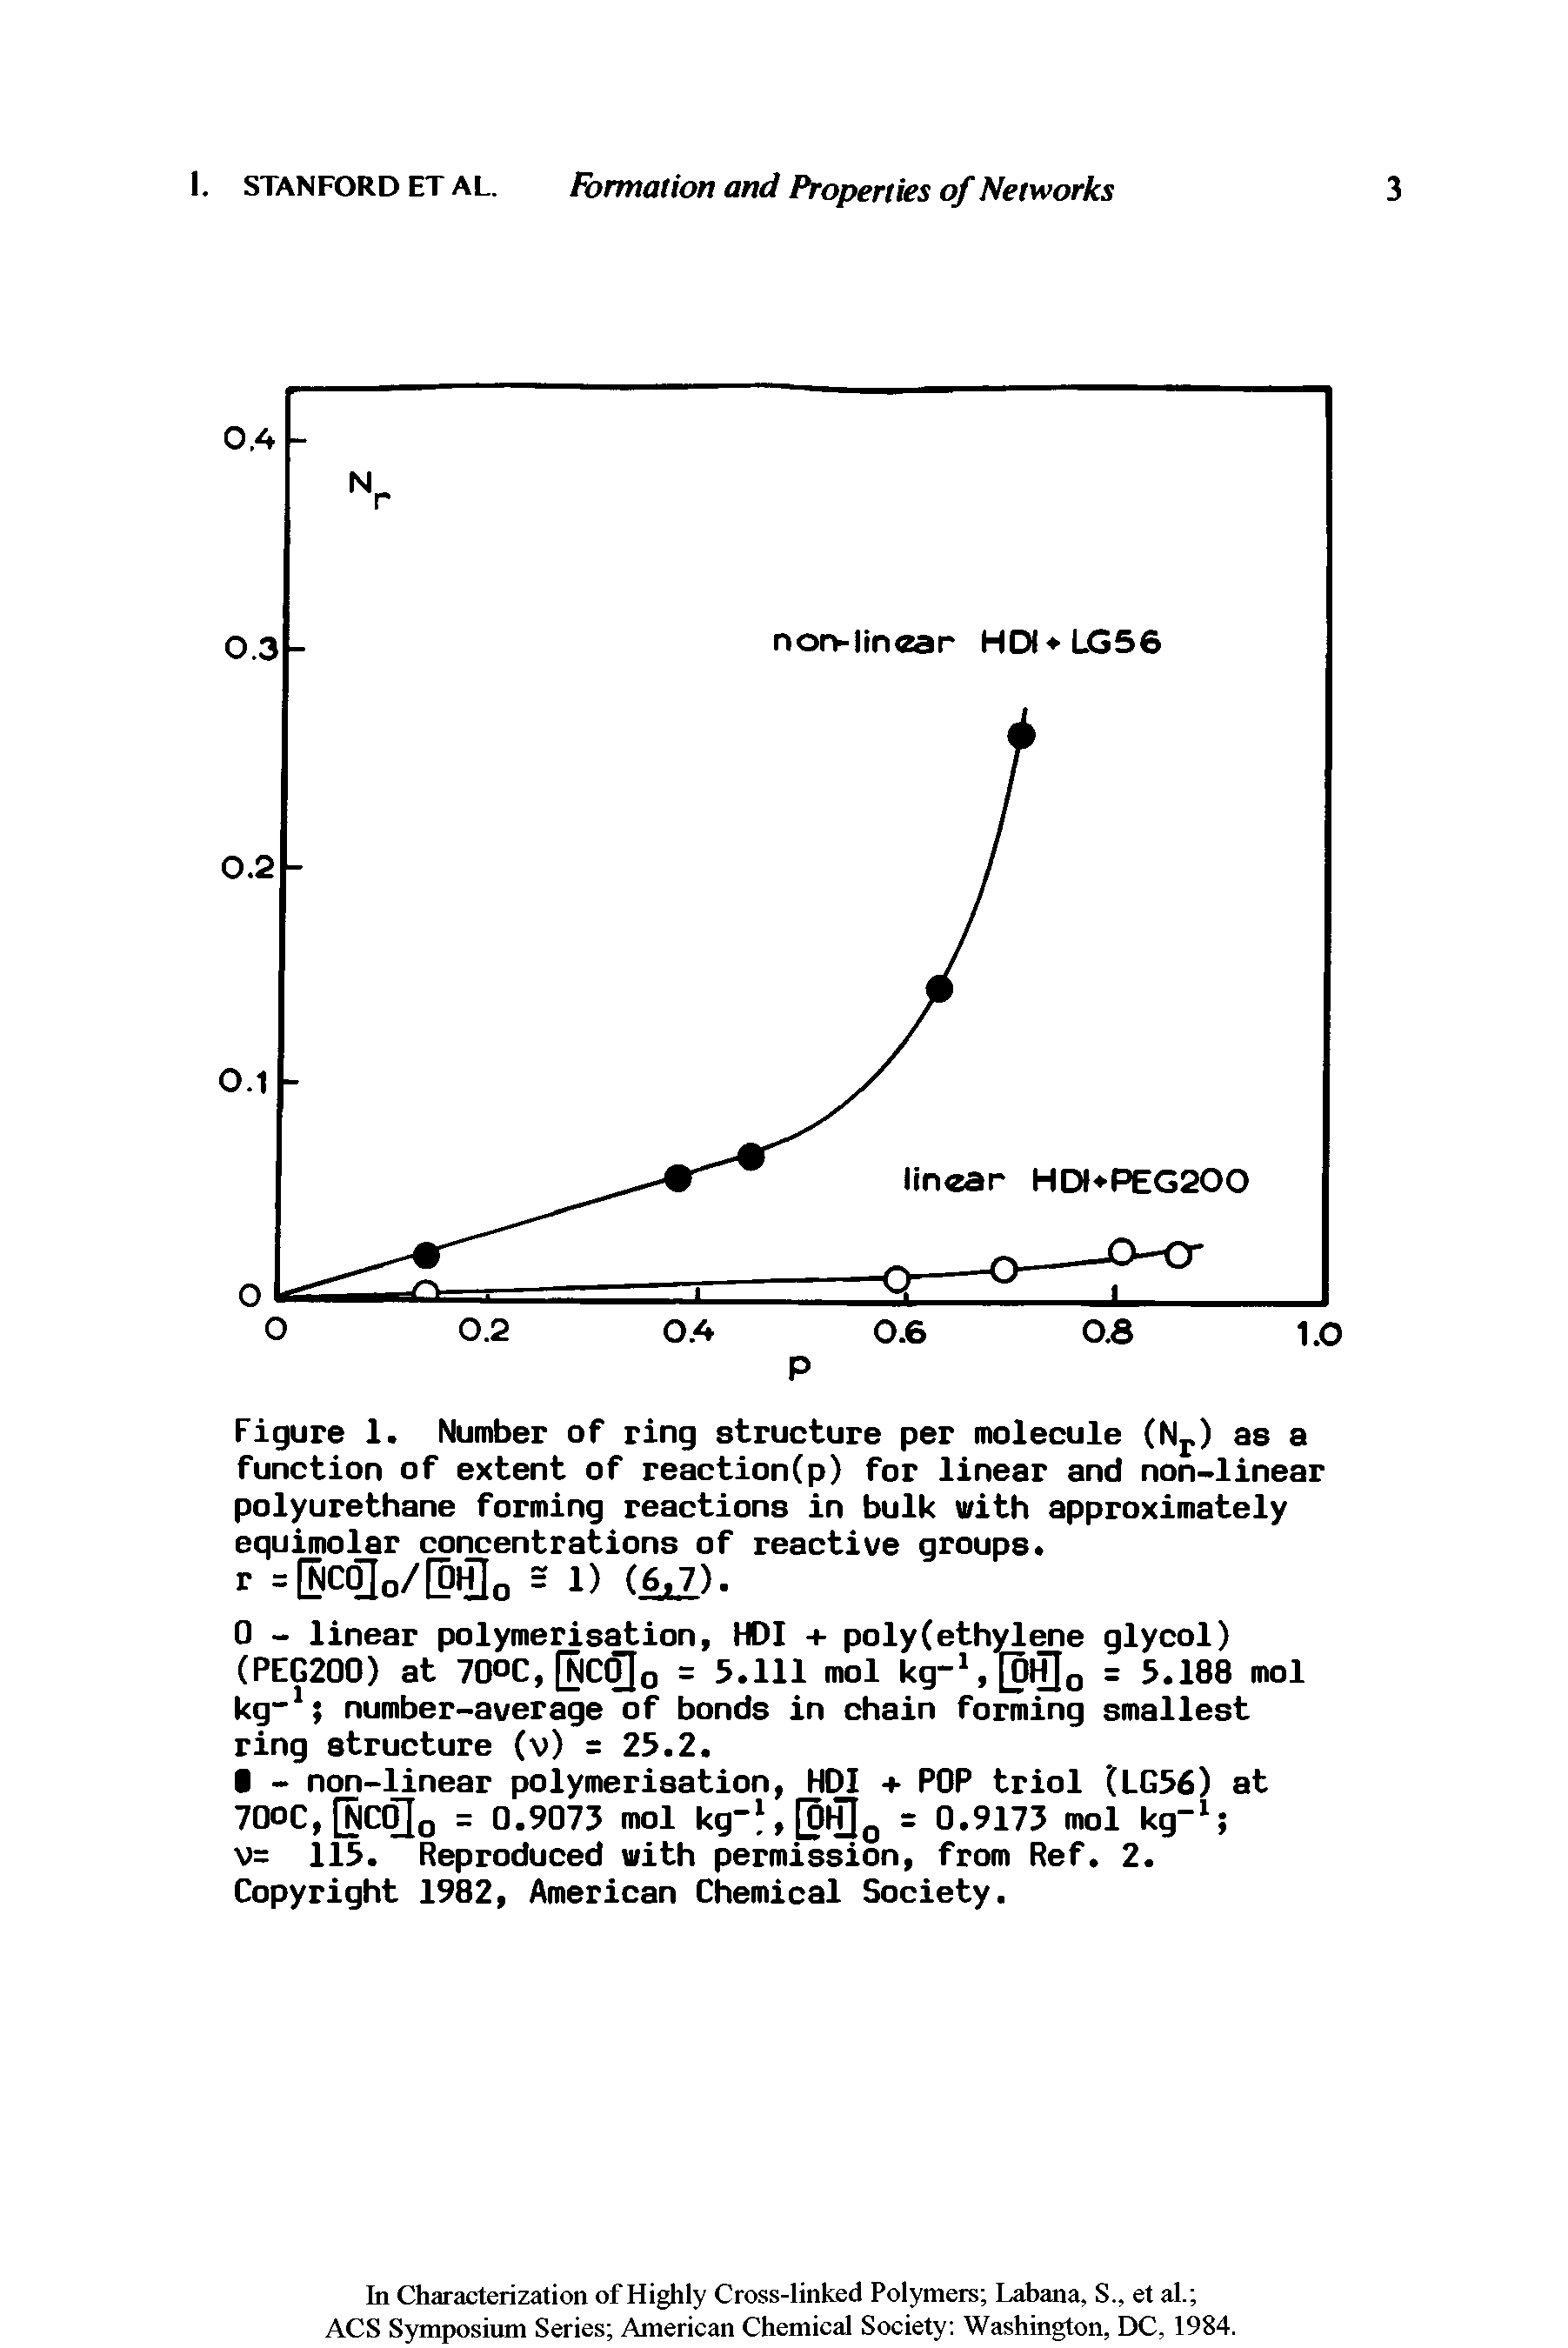 Figure 1. Number of ring structure per molecule (Np) as a function of extent of reaction(p) for linear and non-linear polyurethane forming reactions in bulk with approximately equimolar concentrations of reactive groups, r =[NC0no/[pHlo = 1) (6.7).